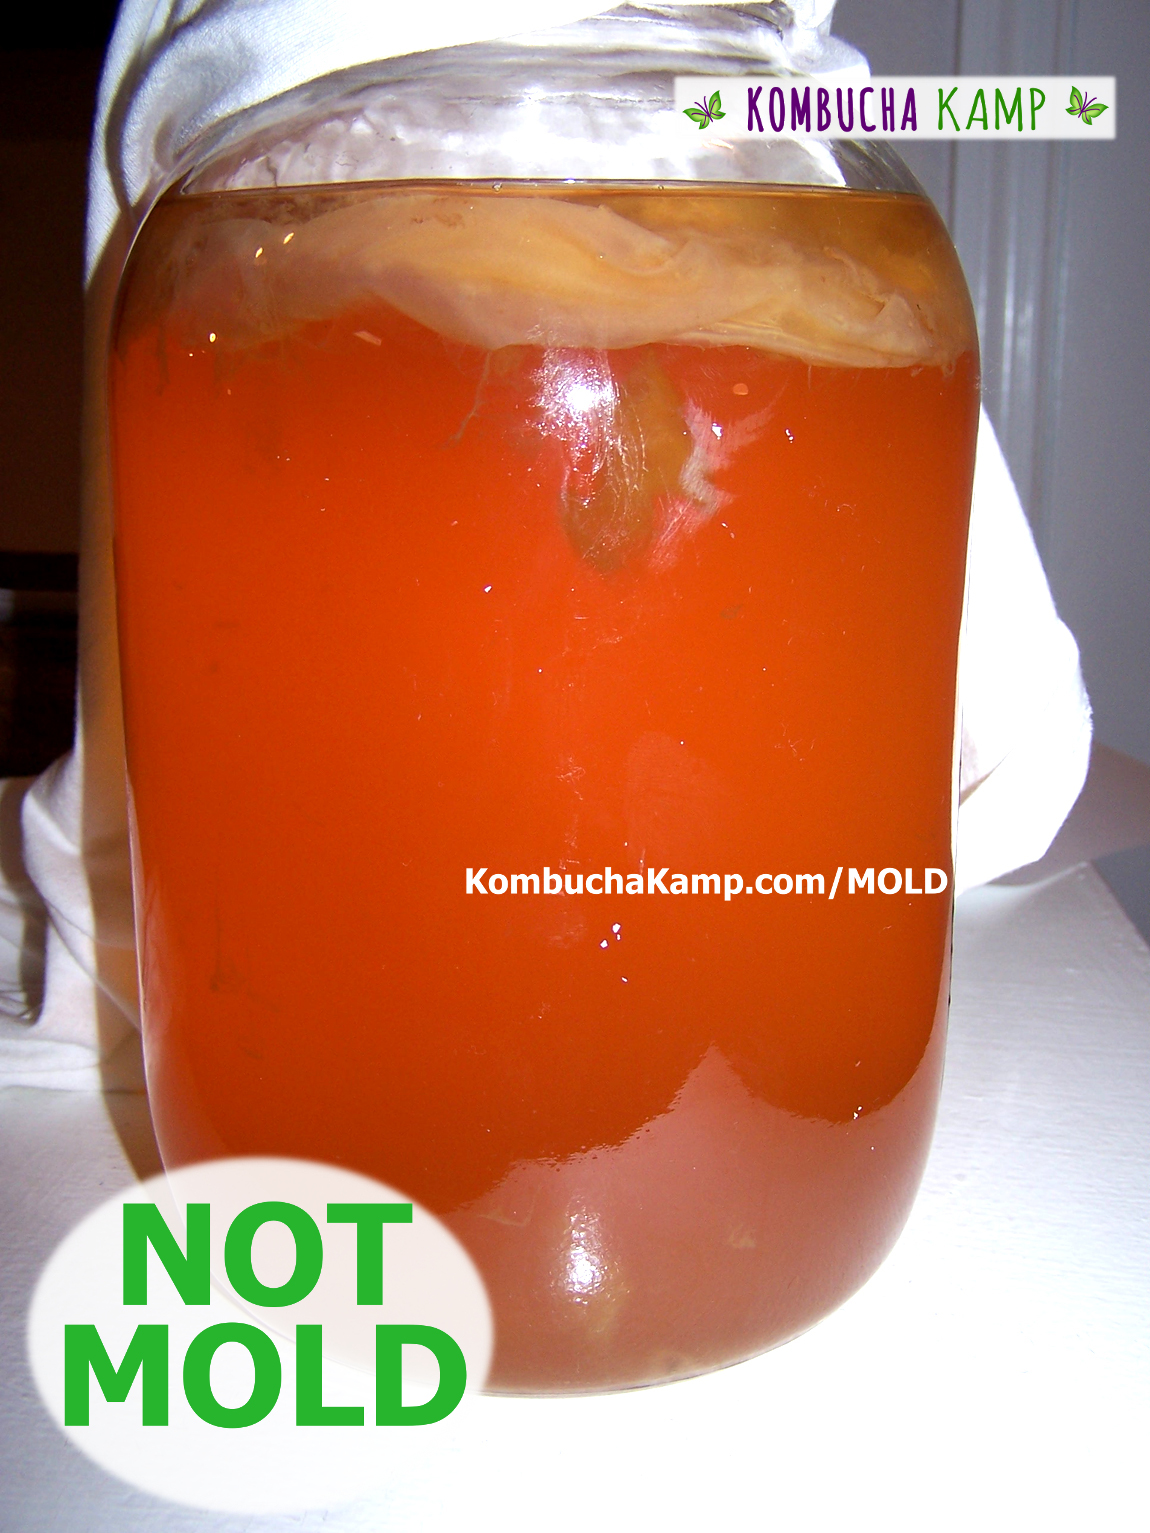 A large brown yeast glob is attached to the underside of a Kombucha SCOBY floating in a 1 gallon brew and visible through the glass jar